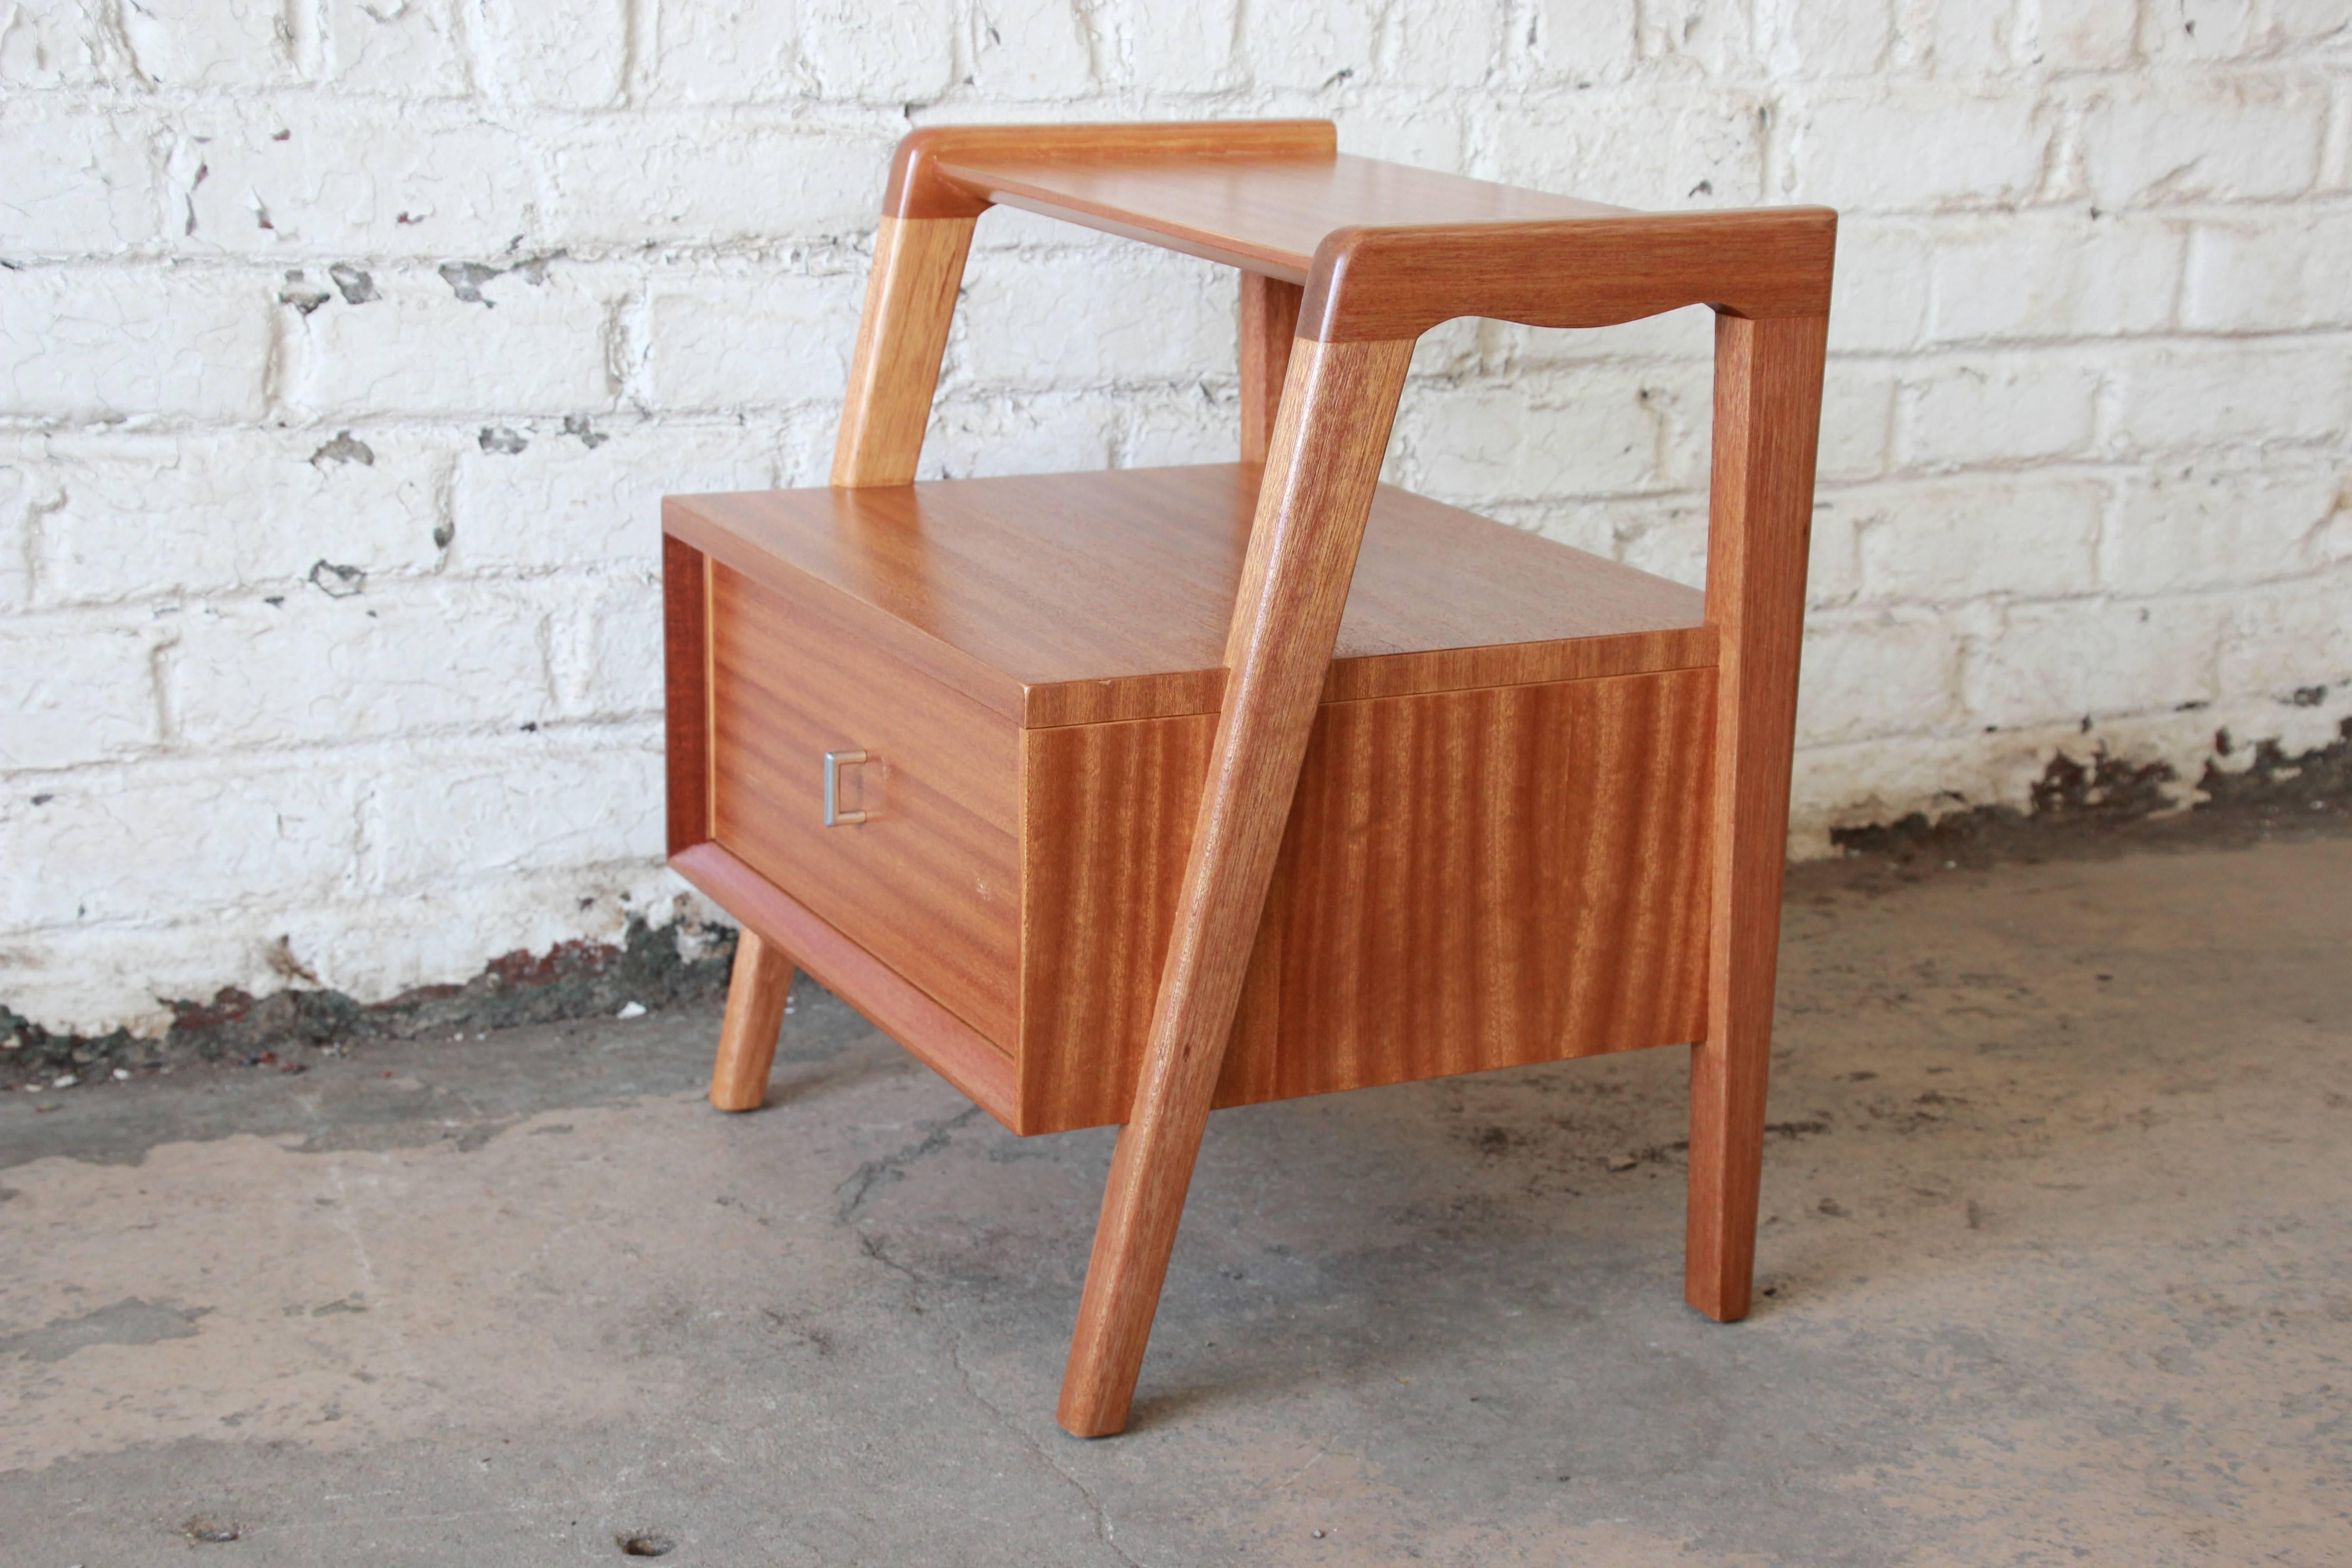 An exceptional Mid-Century Modern mahogany nightstand or end table designed by Paul Laszlo for Brown Saltman. The nightstand features gorgeous mahogany wood grain and sleek midcentury design. It has one deep dovetailed drawer, and the original Brown